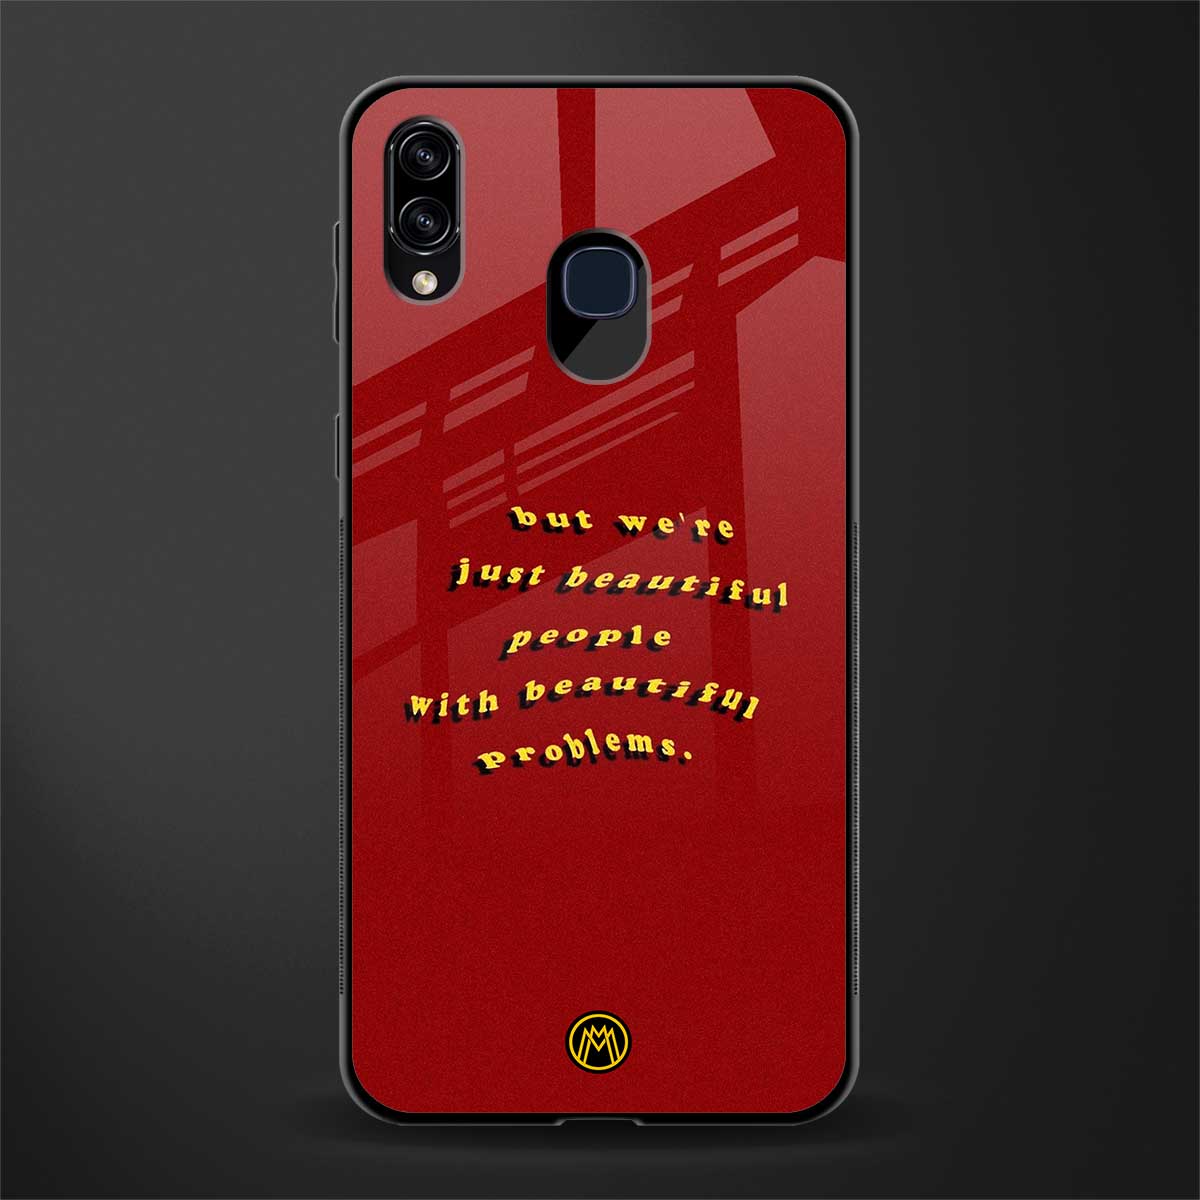 beautiful people with beautiful problems glass case for samsung galaxy a30 image